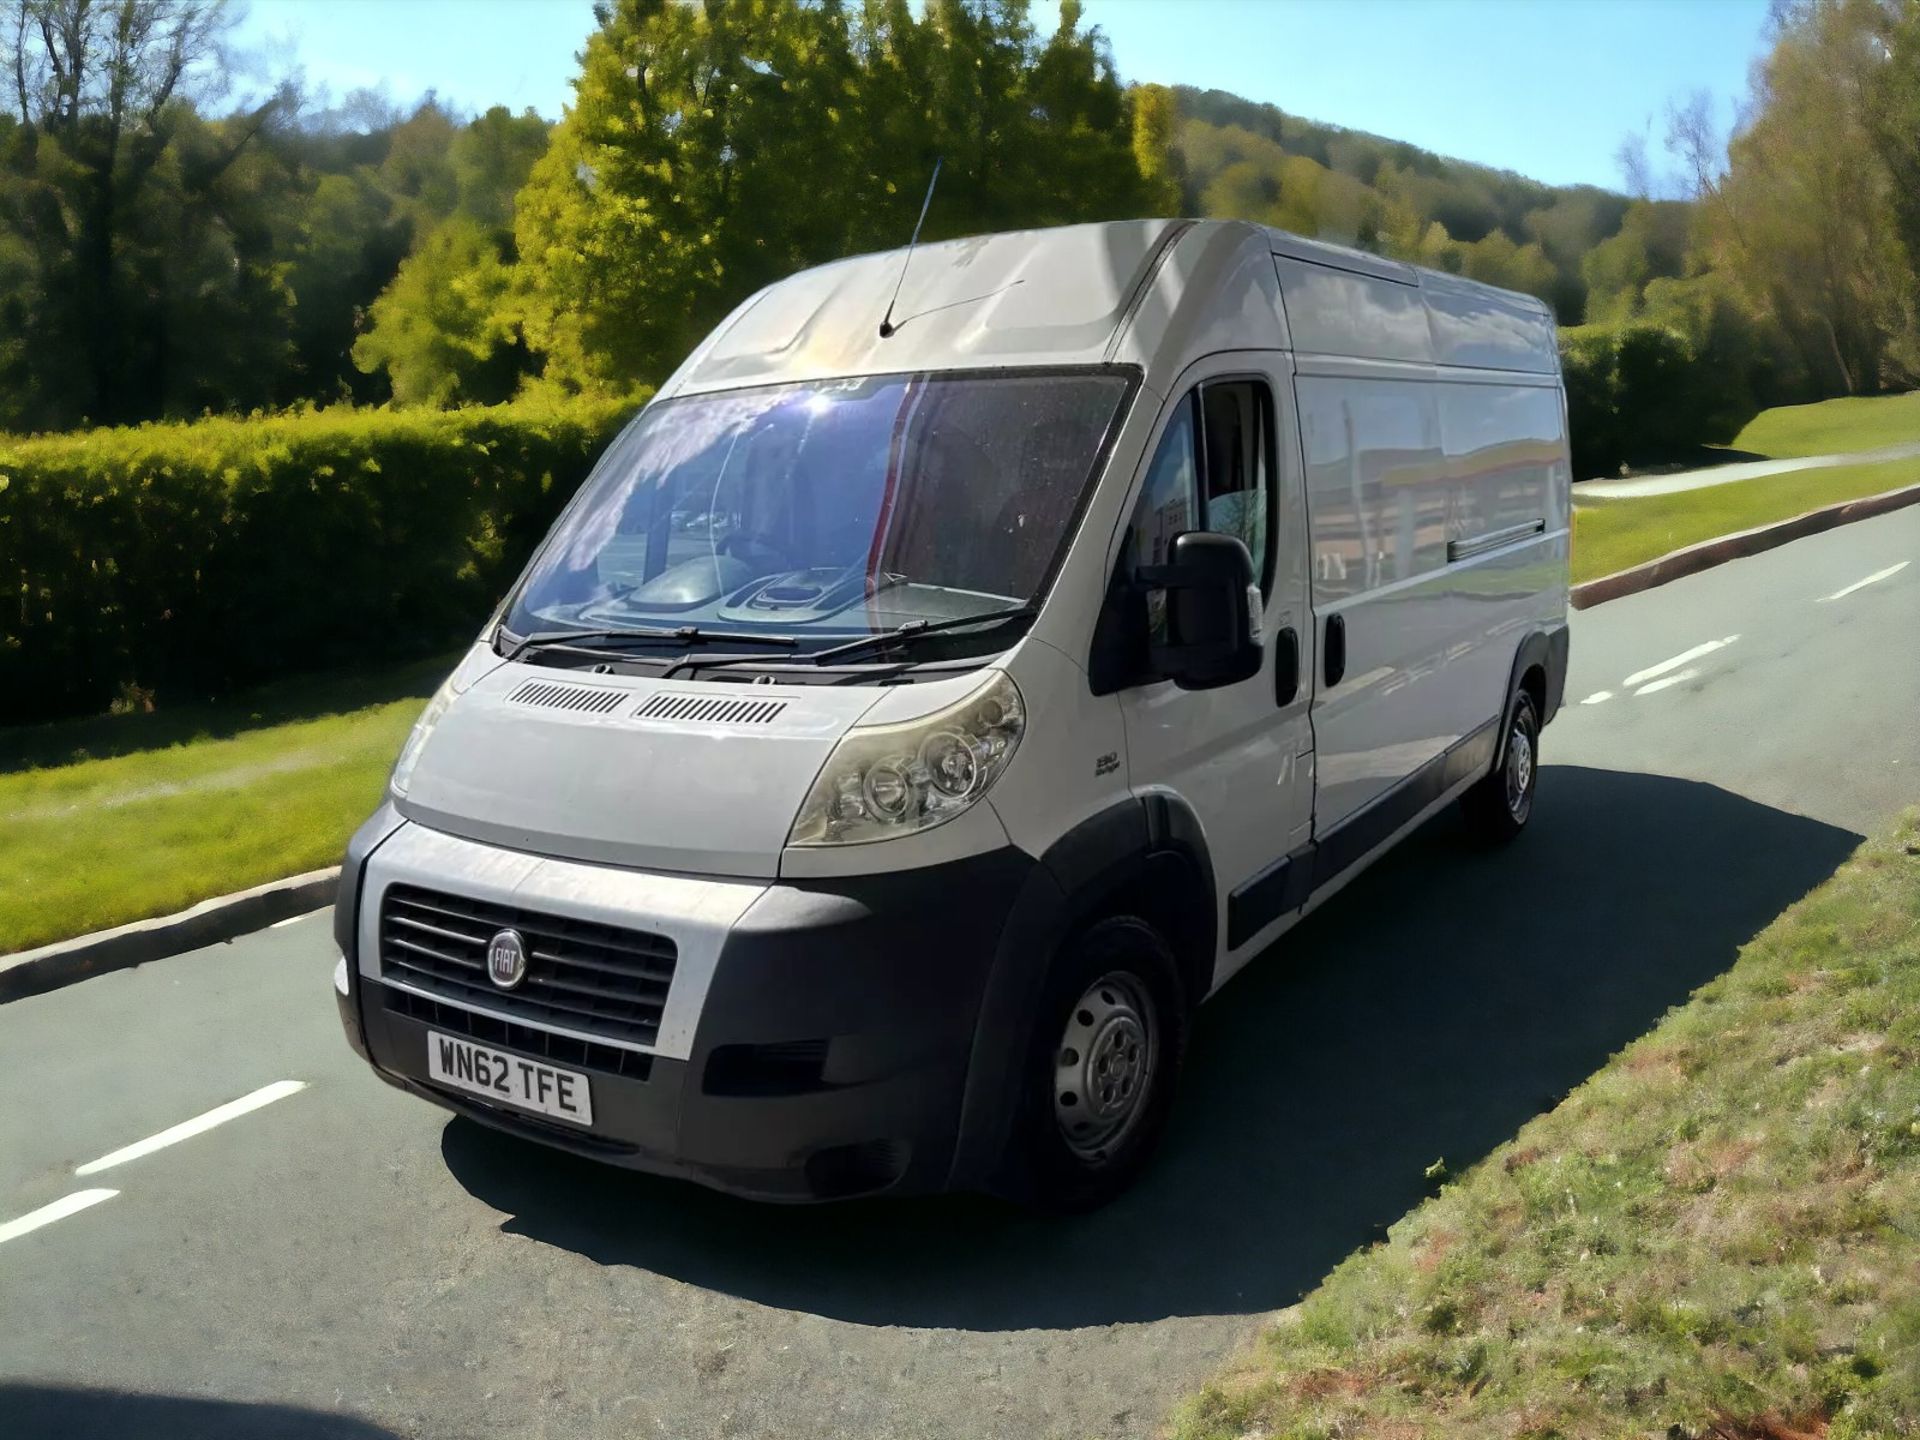 2013 FIAT DUCATO 35 MULTI JET LWB L3H2 - HPI CLEAR - READY TO GO! - Image 2 of 10